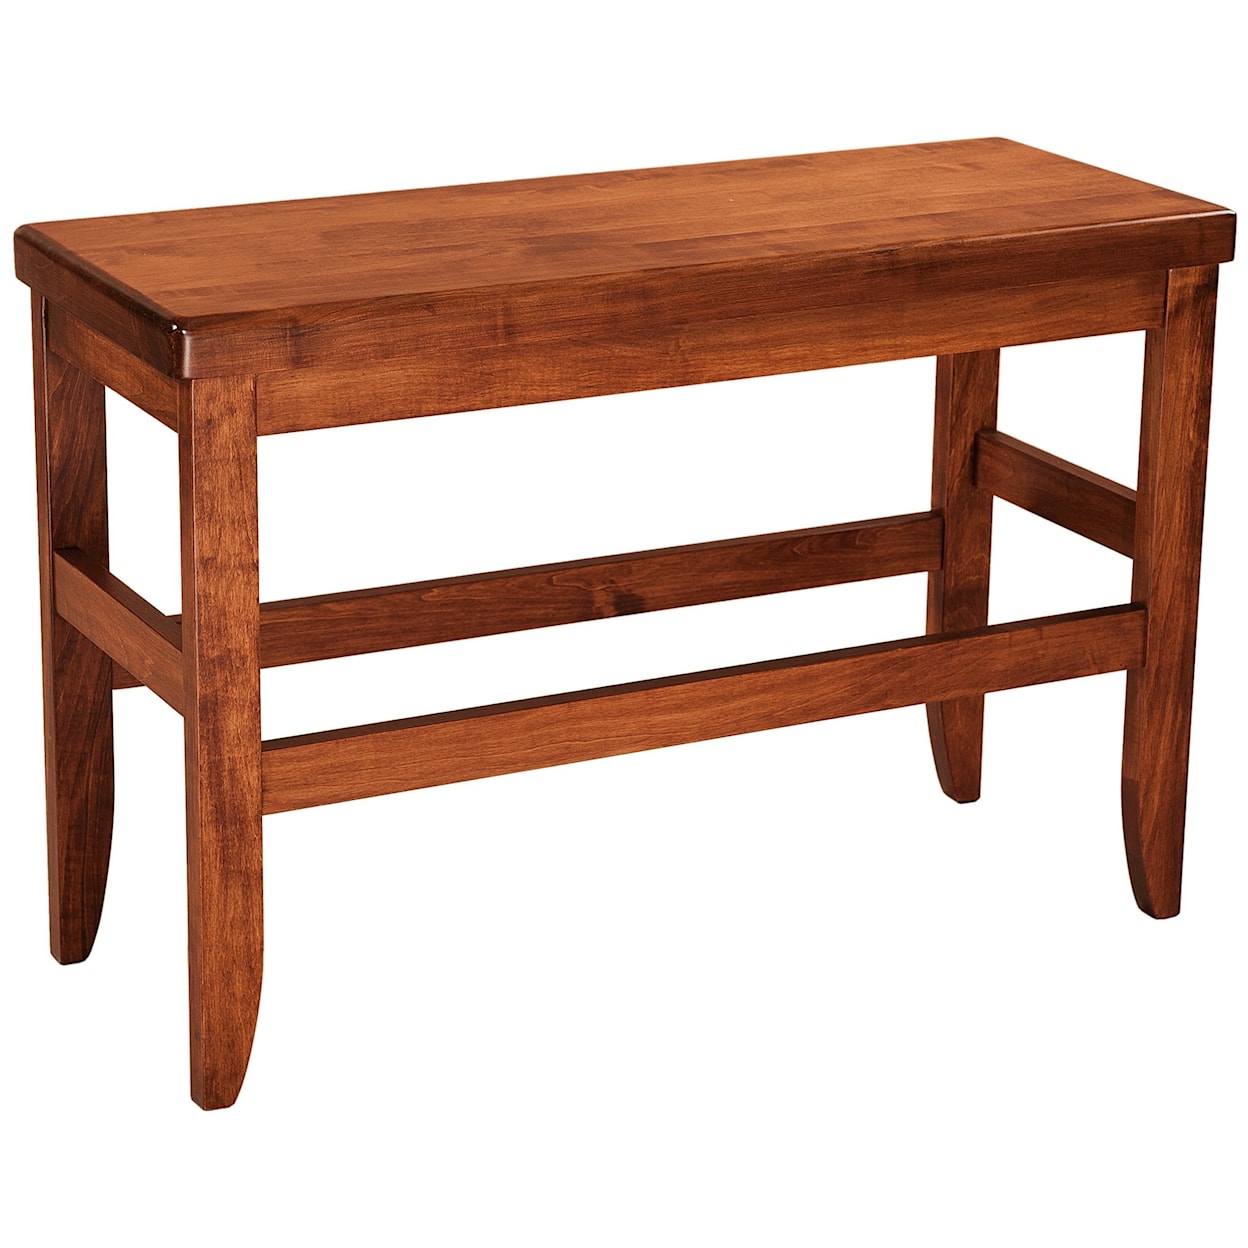 F&N Woodworking Clifton Bench 24"h x 60"w - Wood Seat